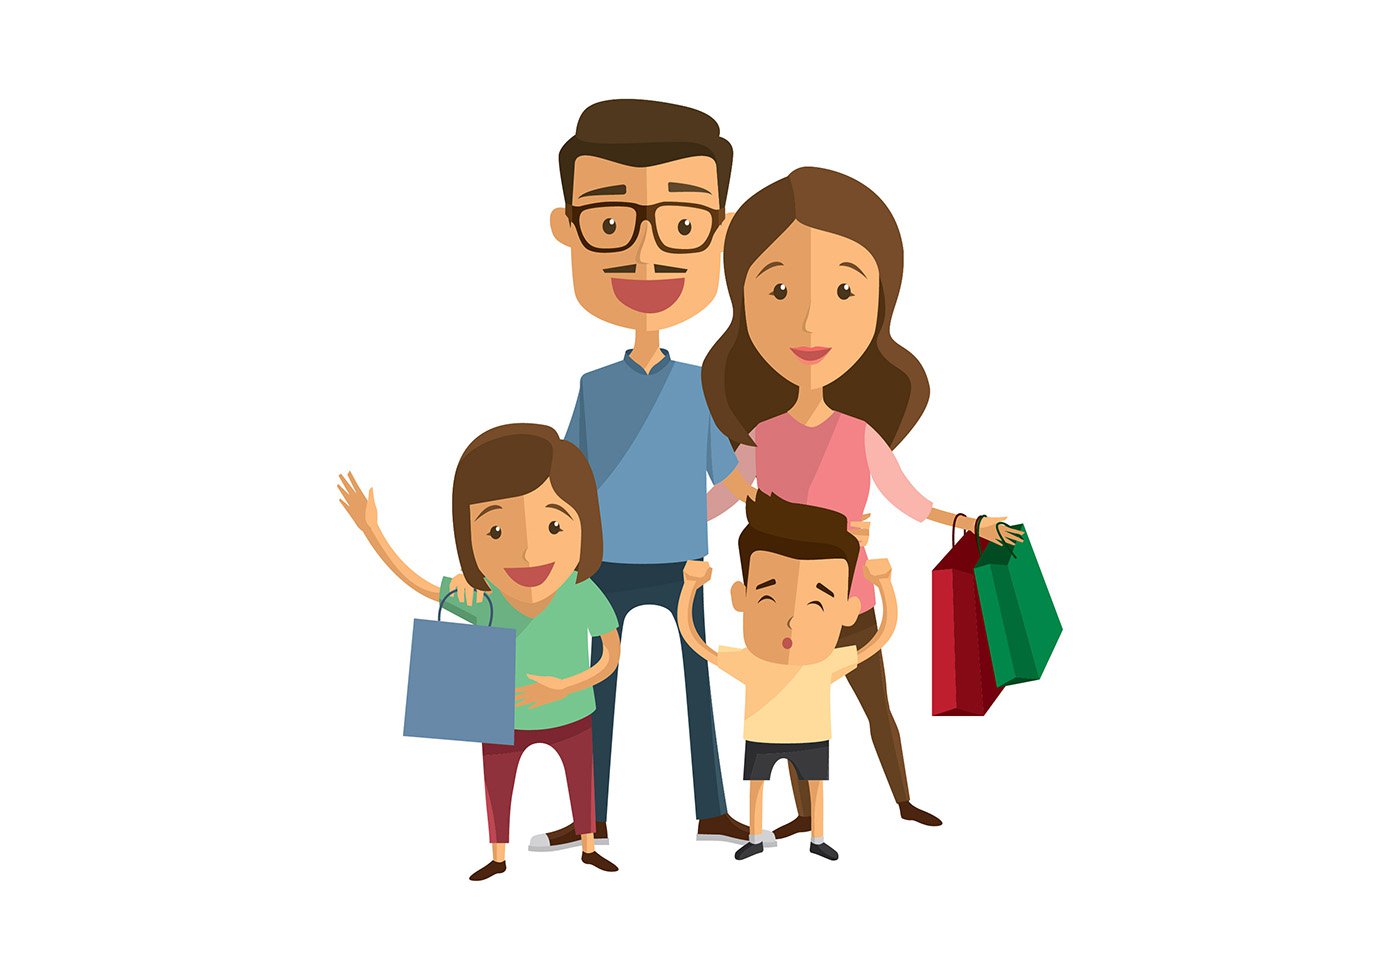 Family Free Vector Art - (4954 Free Downloads)